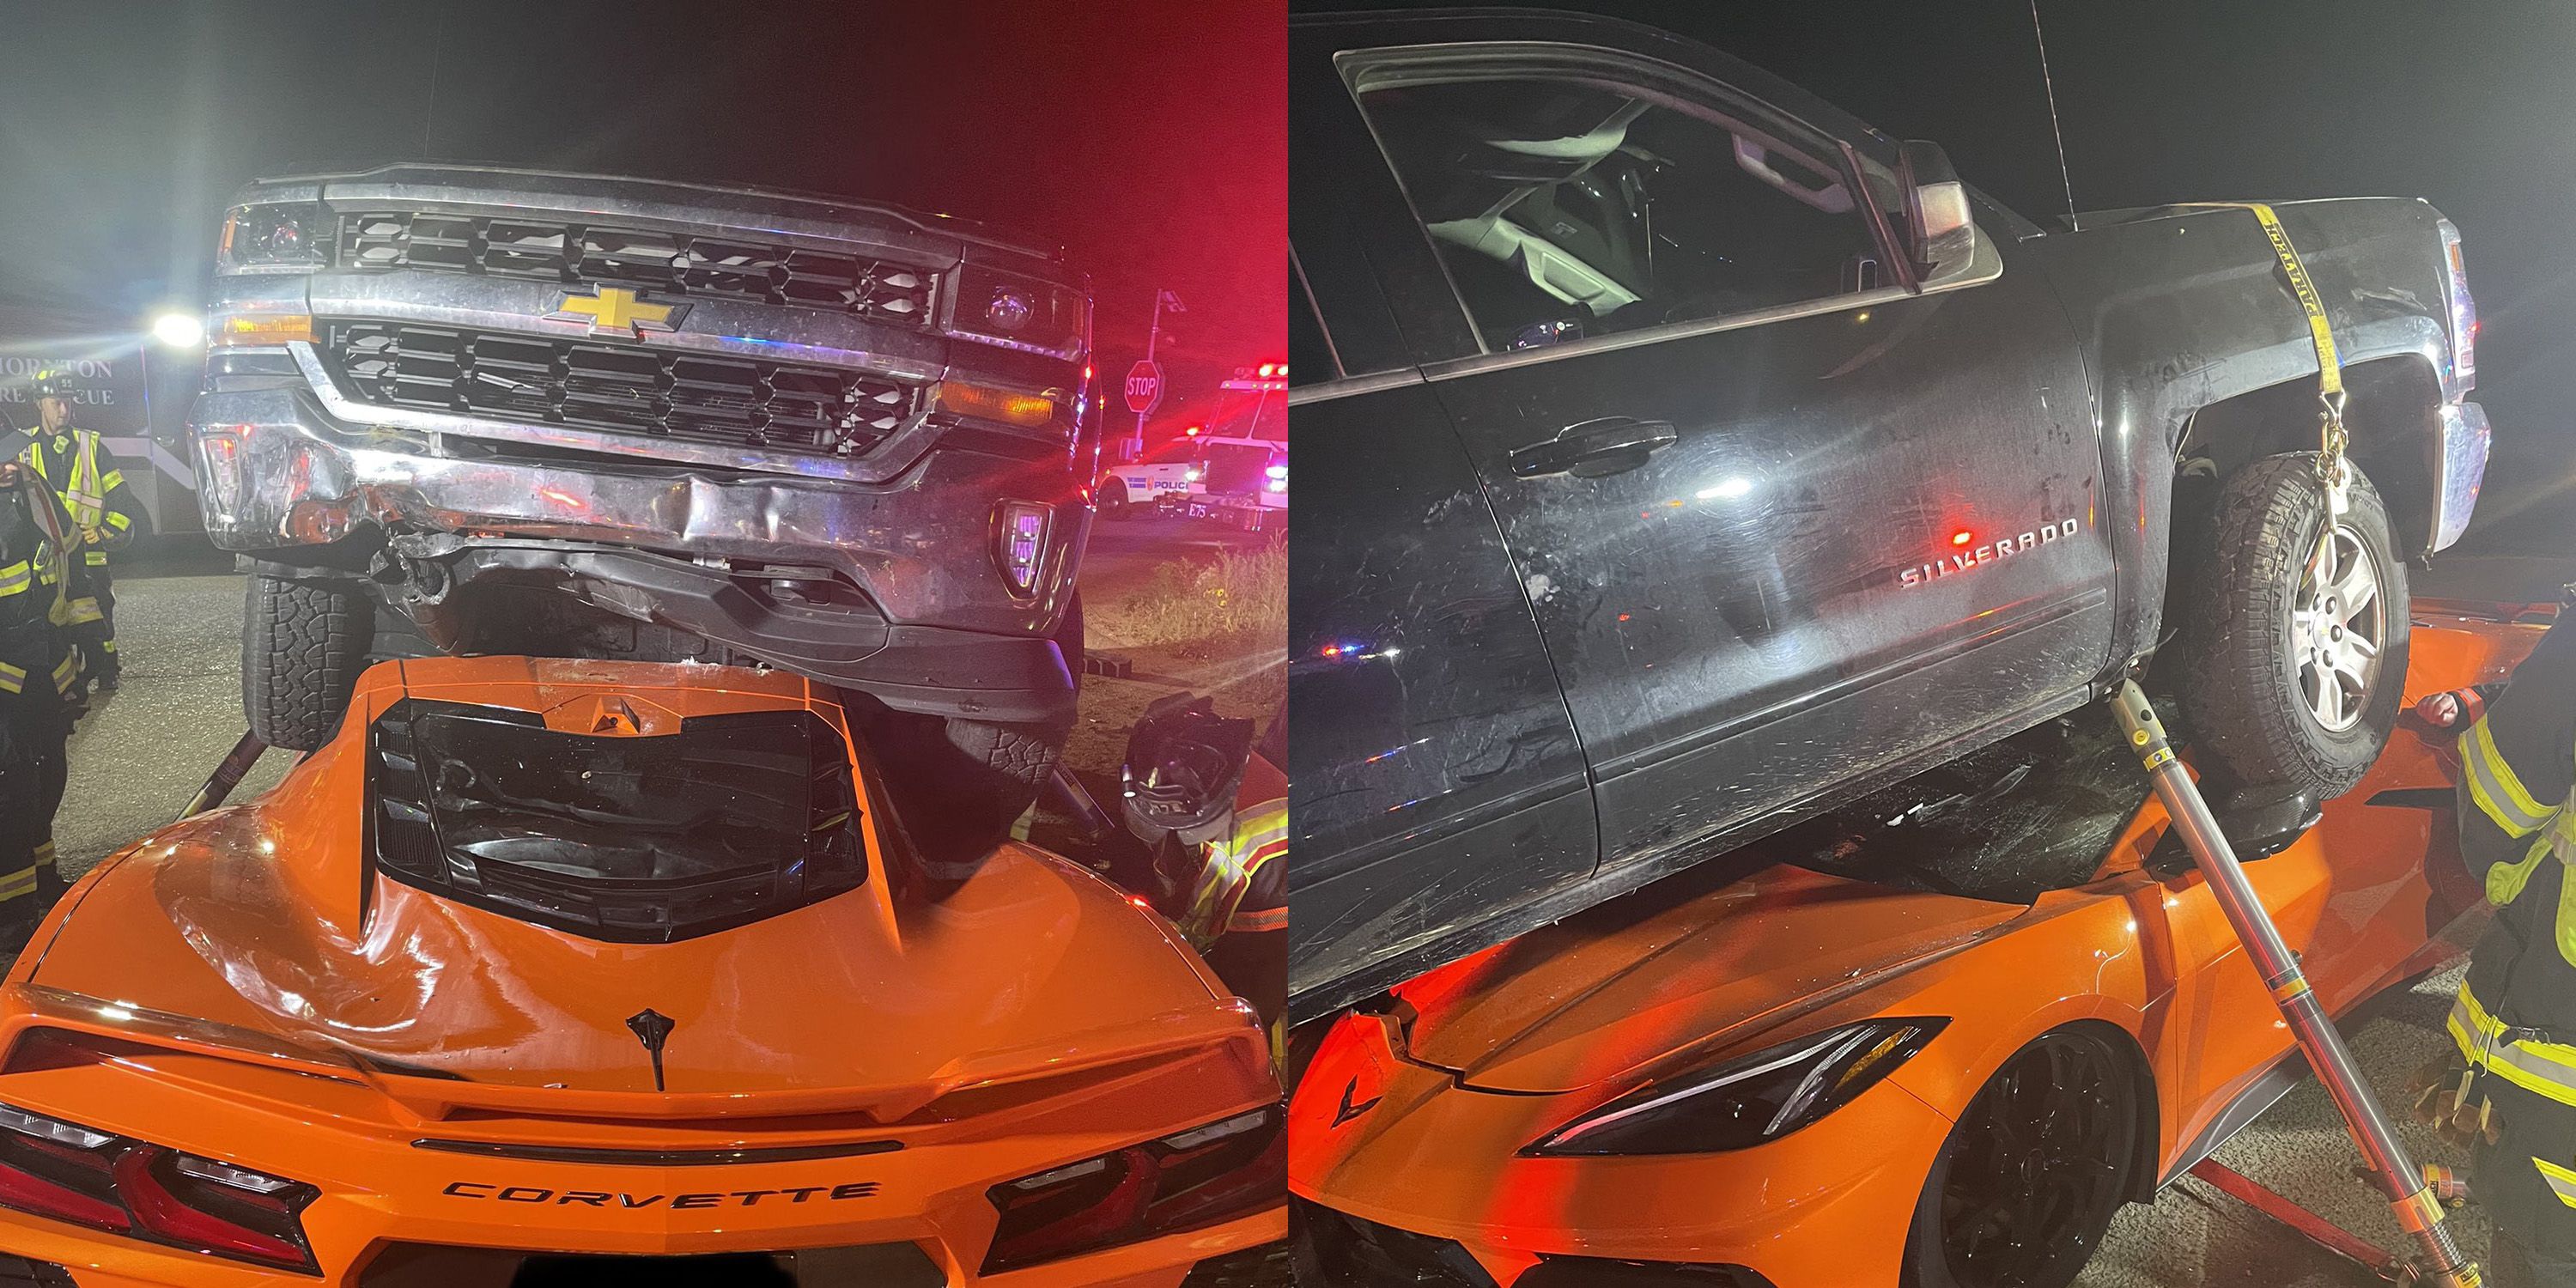 Video Shows Terrifying Head-on Crash That Left Truck Mounted on Top of C8 Corvette